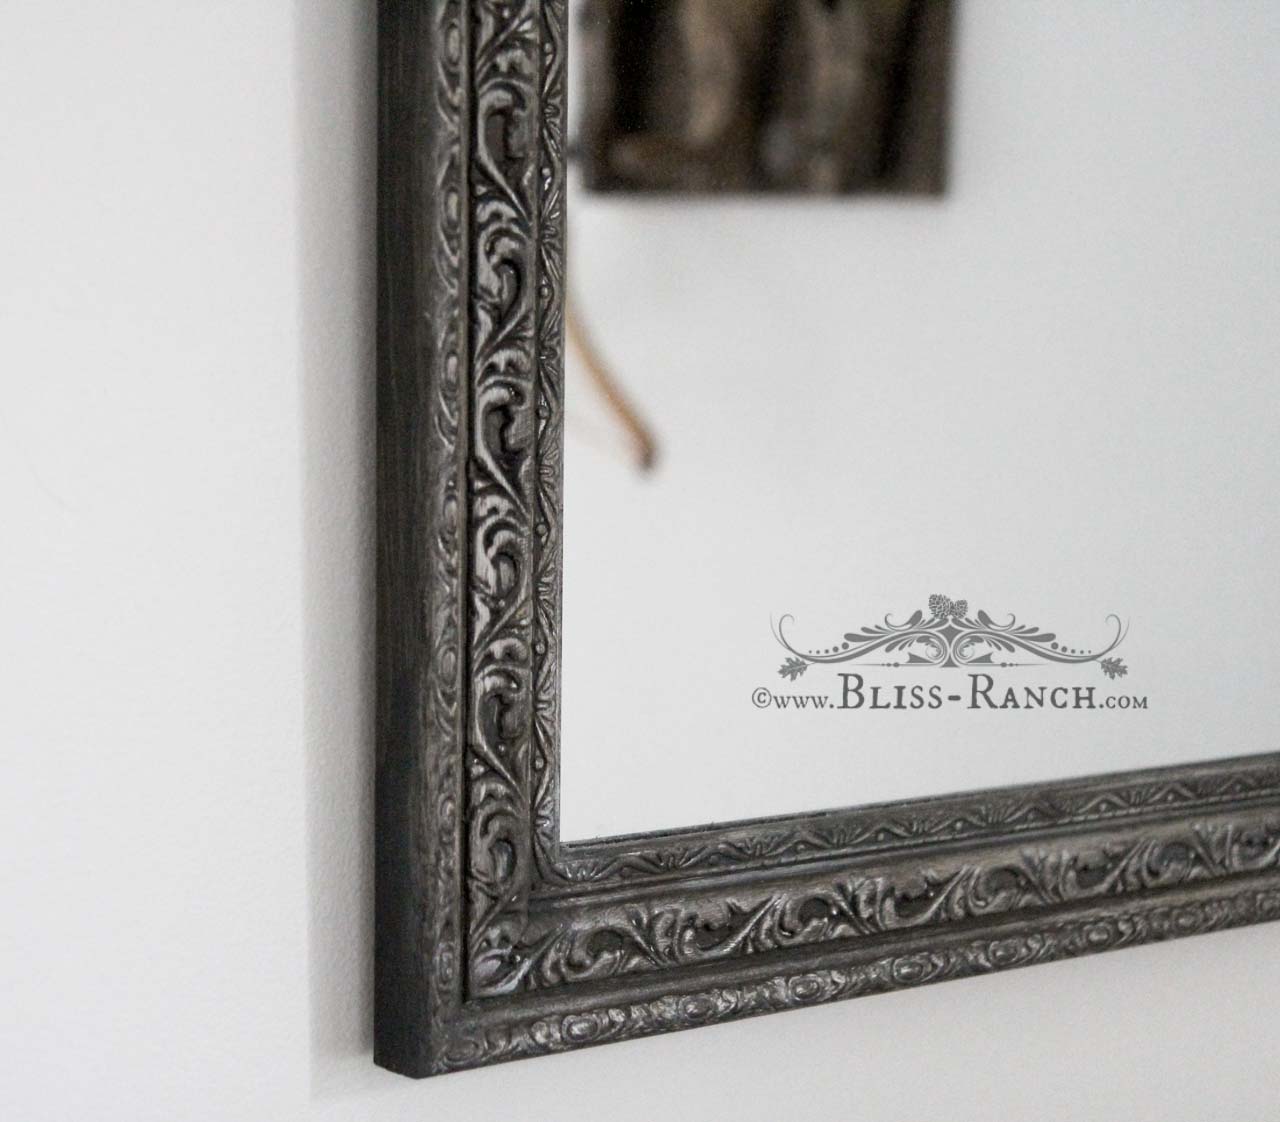 Home Project // Thrift Store Mirror to Chalkboard Calendar